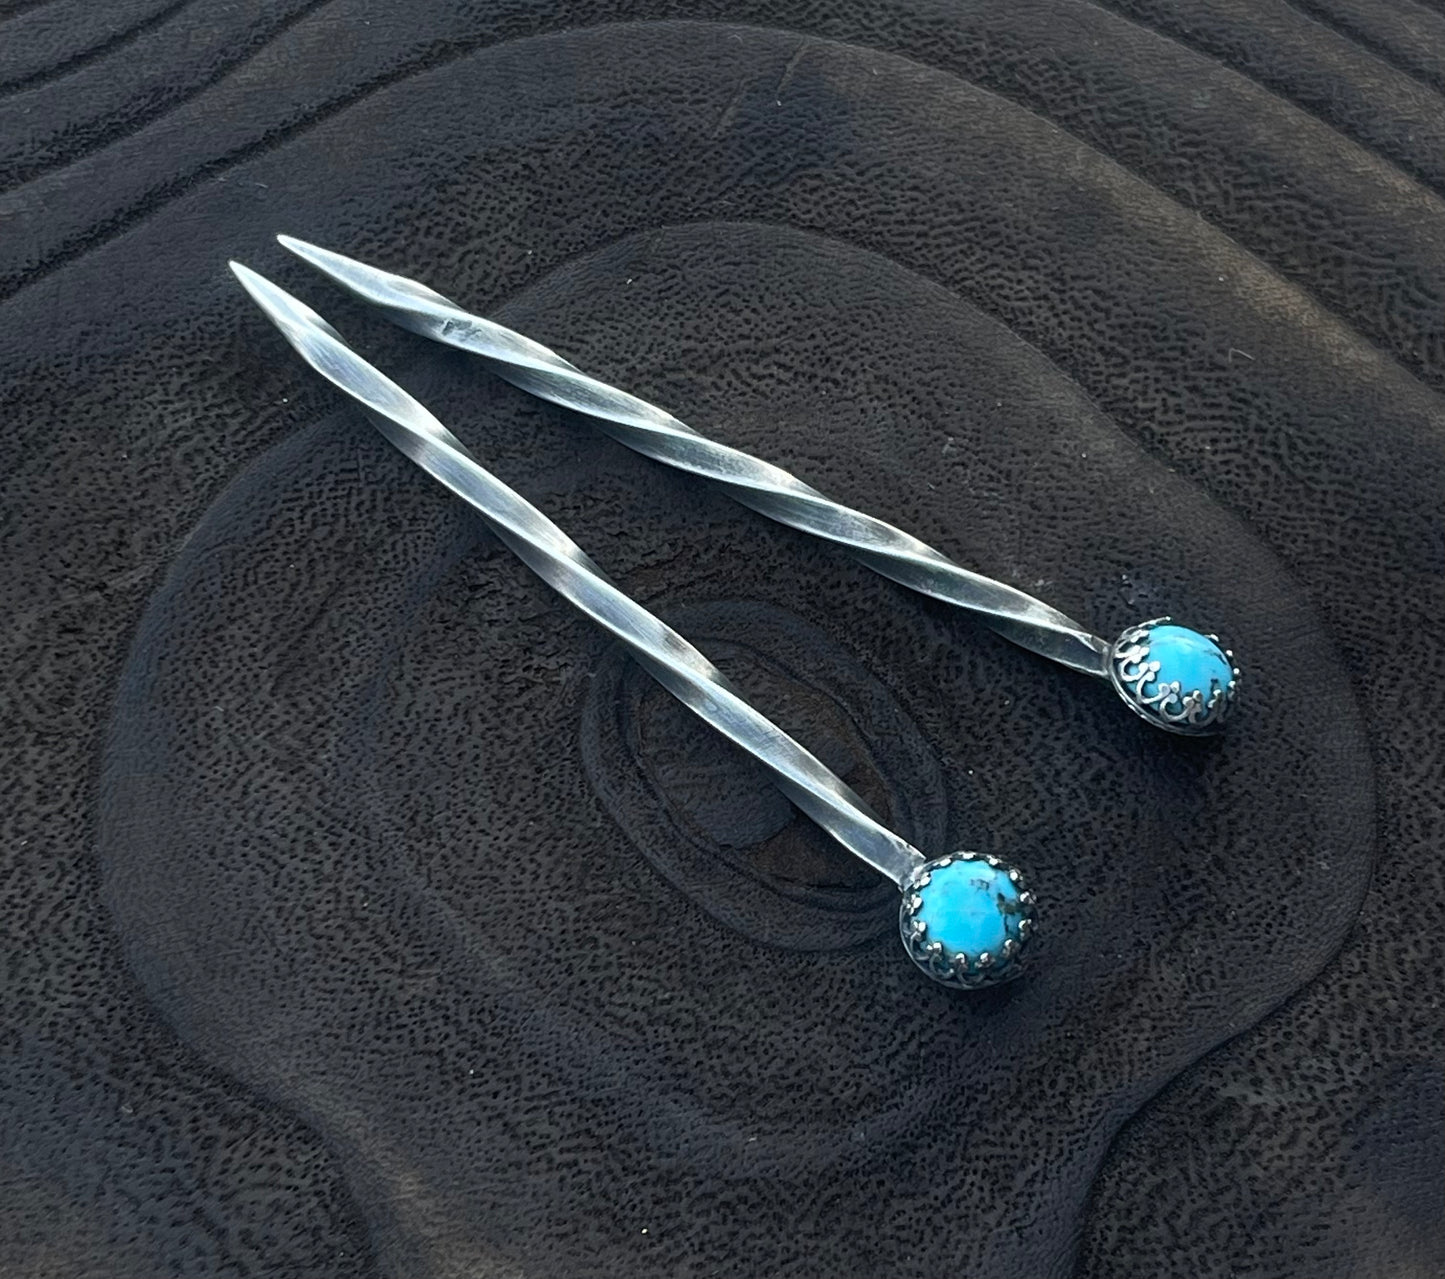 Turquoise Sterling Silver Cowboy Toothpick